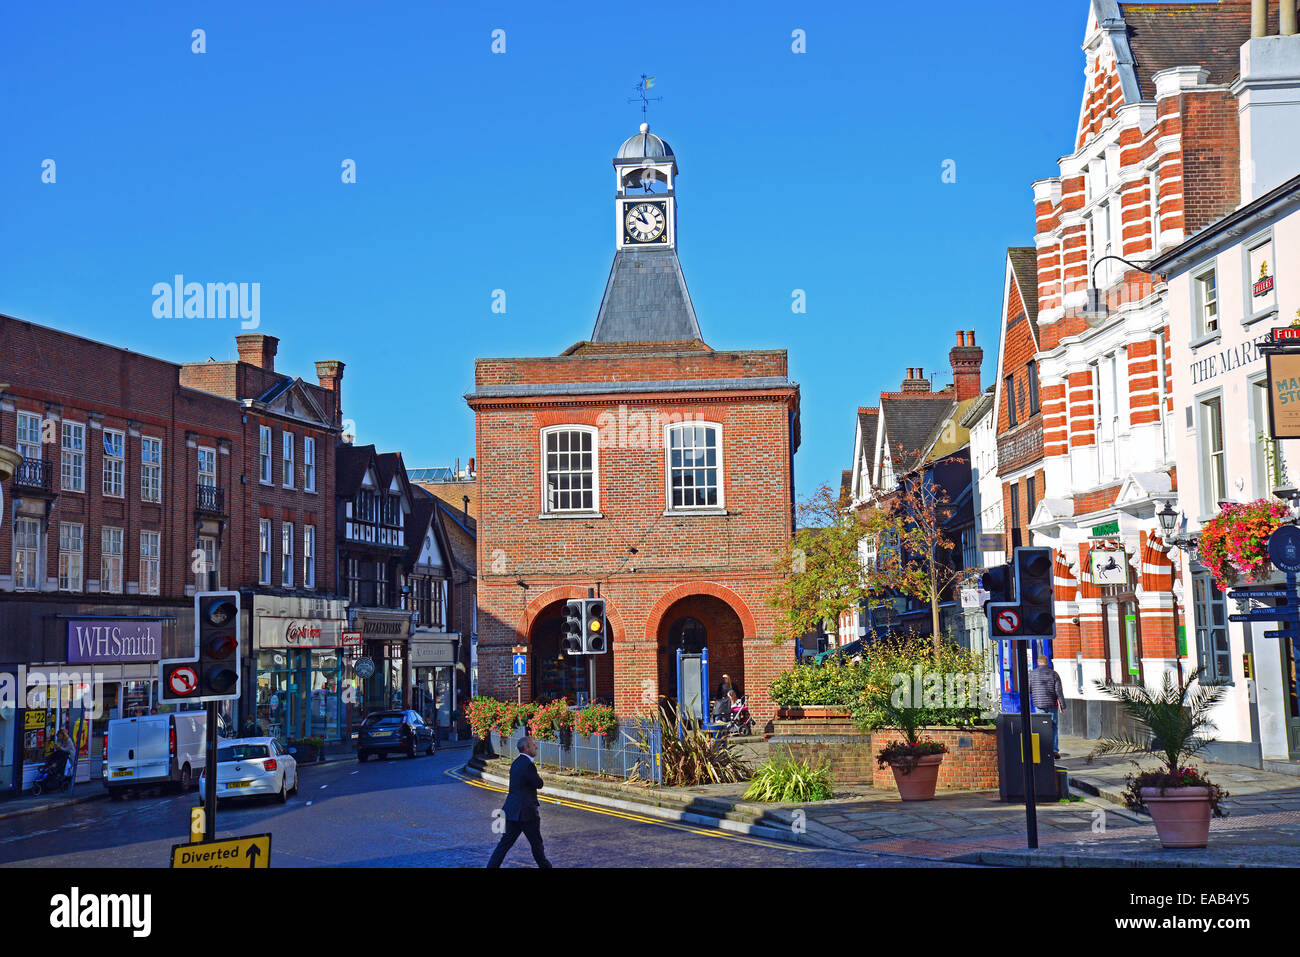 View of High Street and Market House, Reigate, Surrey, England, United Kingdom Stock Photo